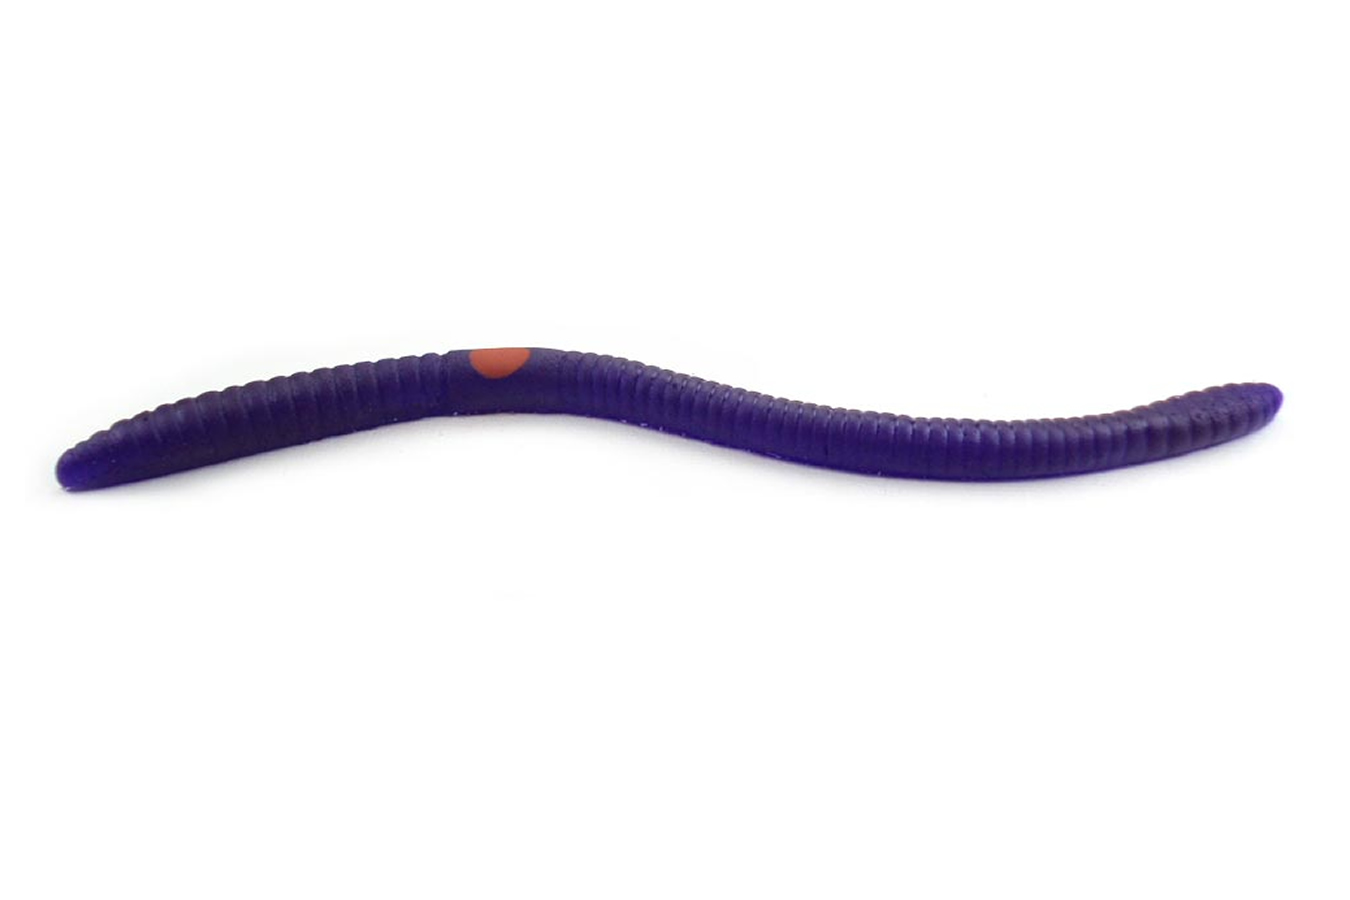 Discount Kelly S Weedless Bass Crawler- Purple Wild Grape for Sale